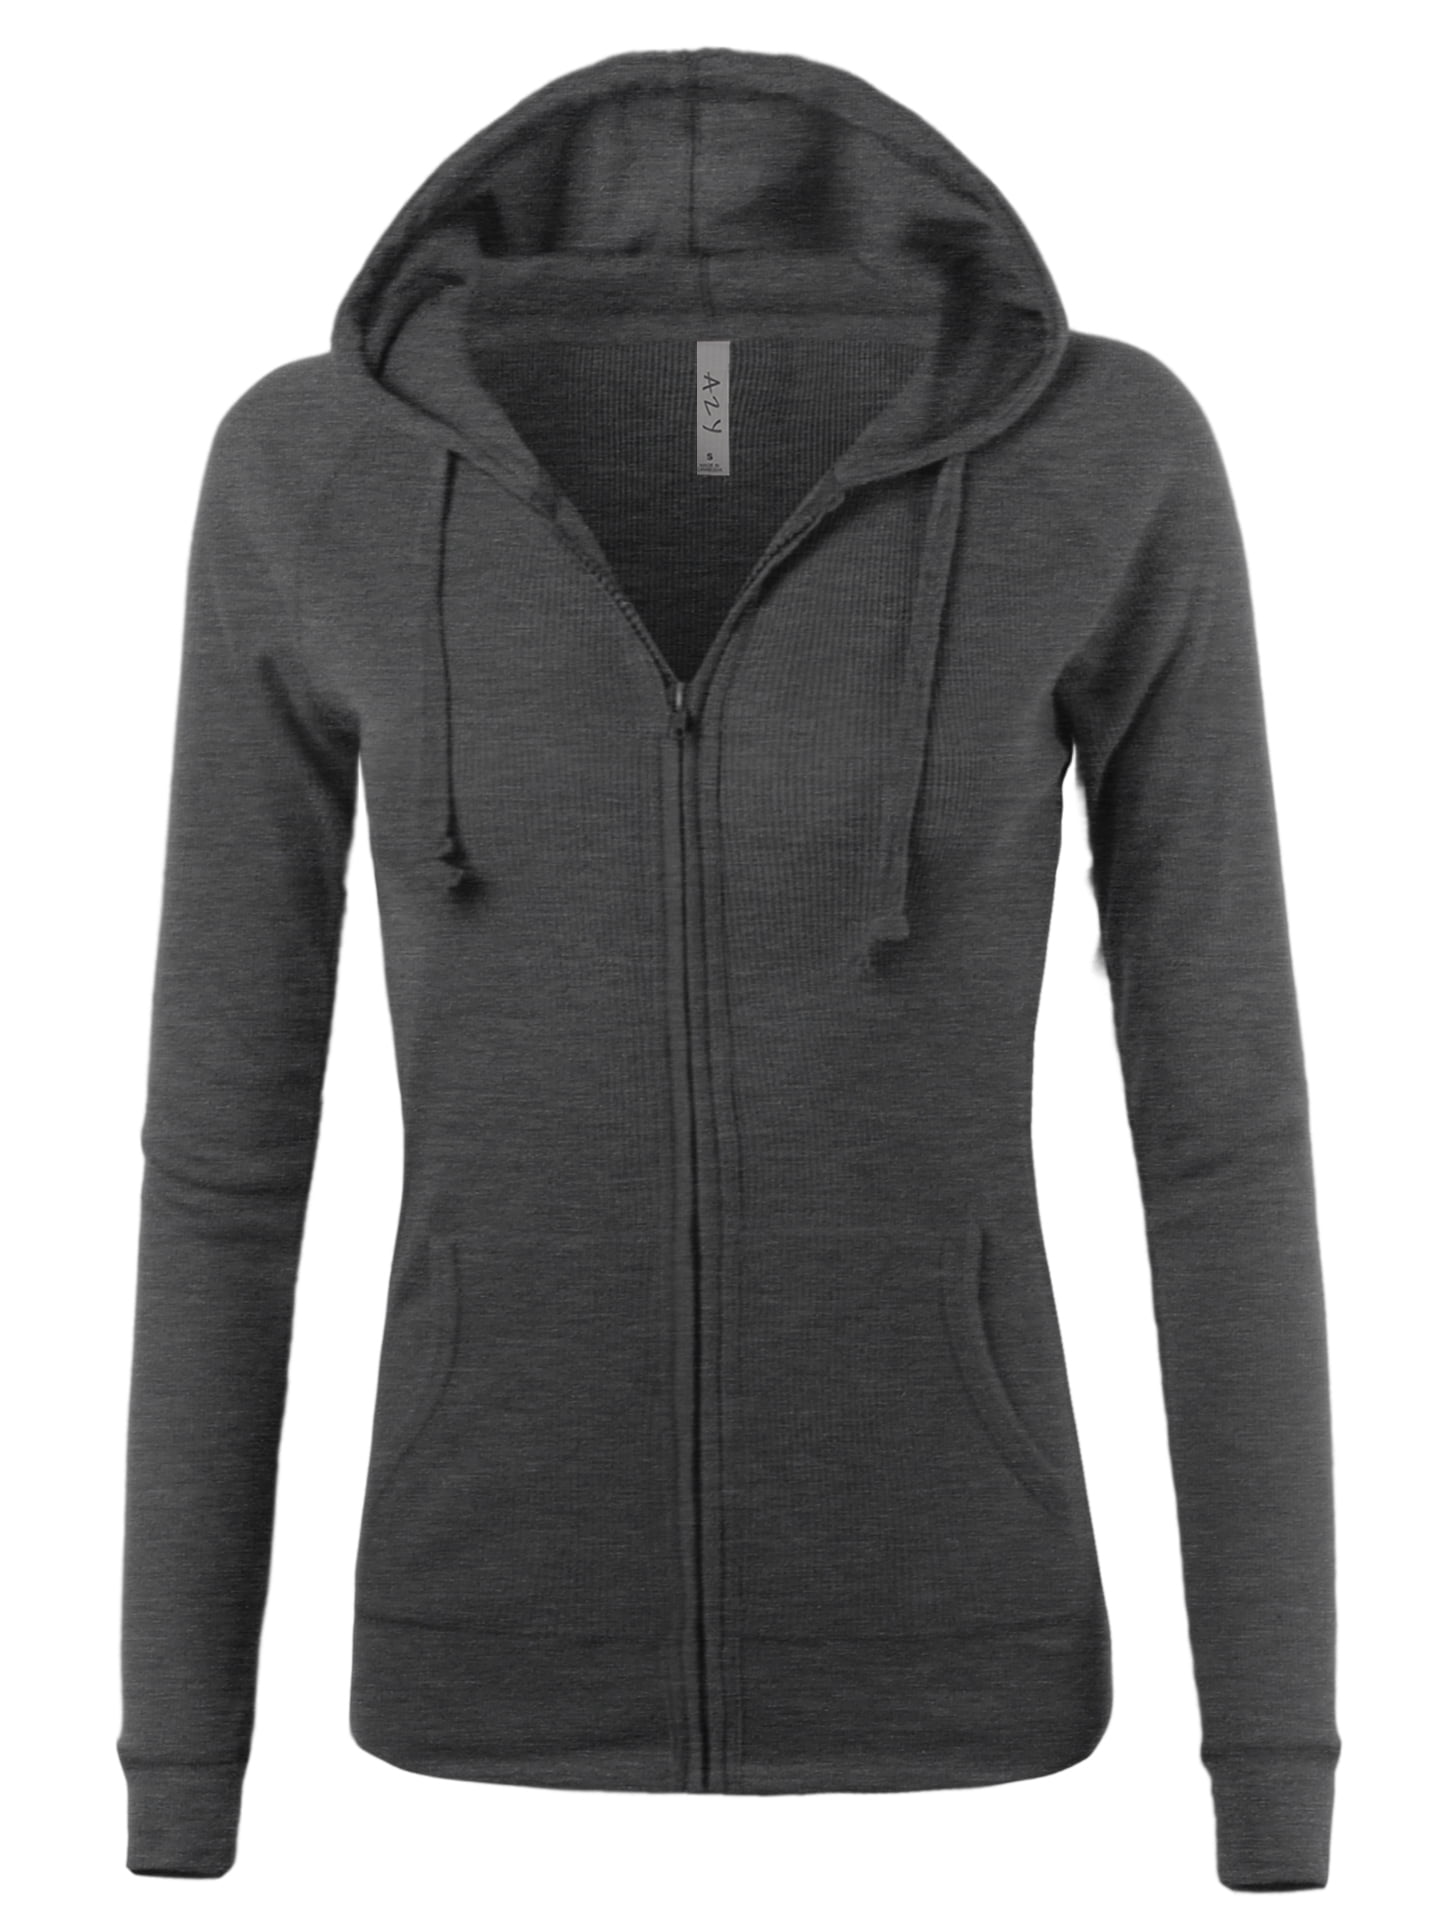 A2Y Women's Casual Fitted Lightweight Pocket Zip Up Hoodie Charcoal 1XL ...